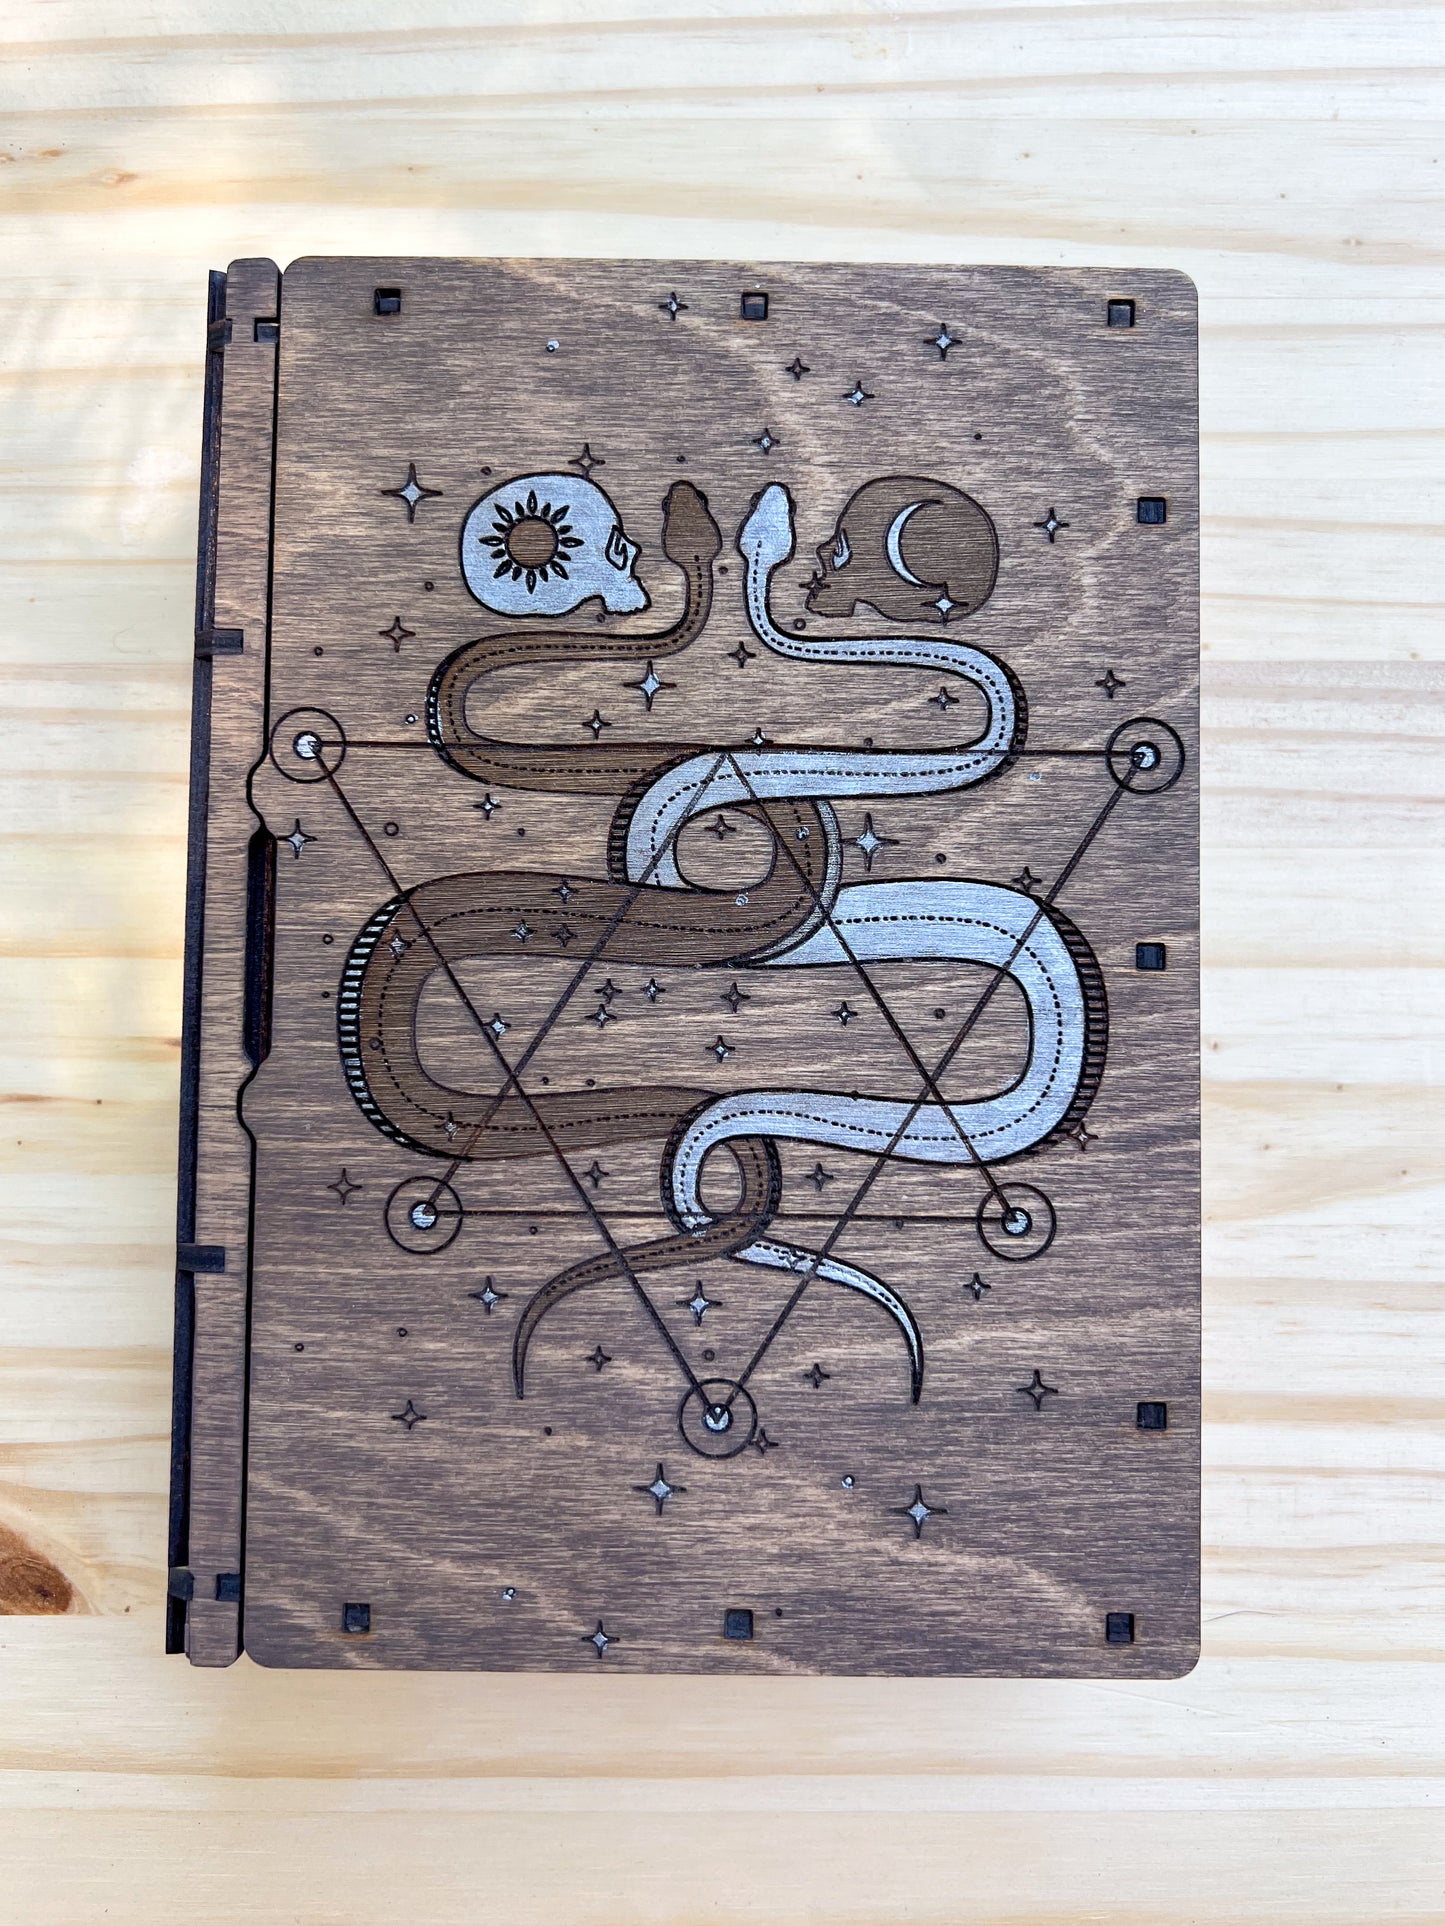 Goddess book box with Snake Lovers Tarot front